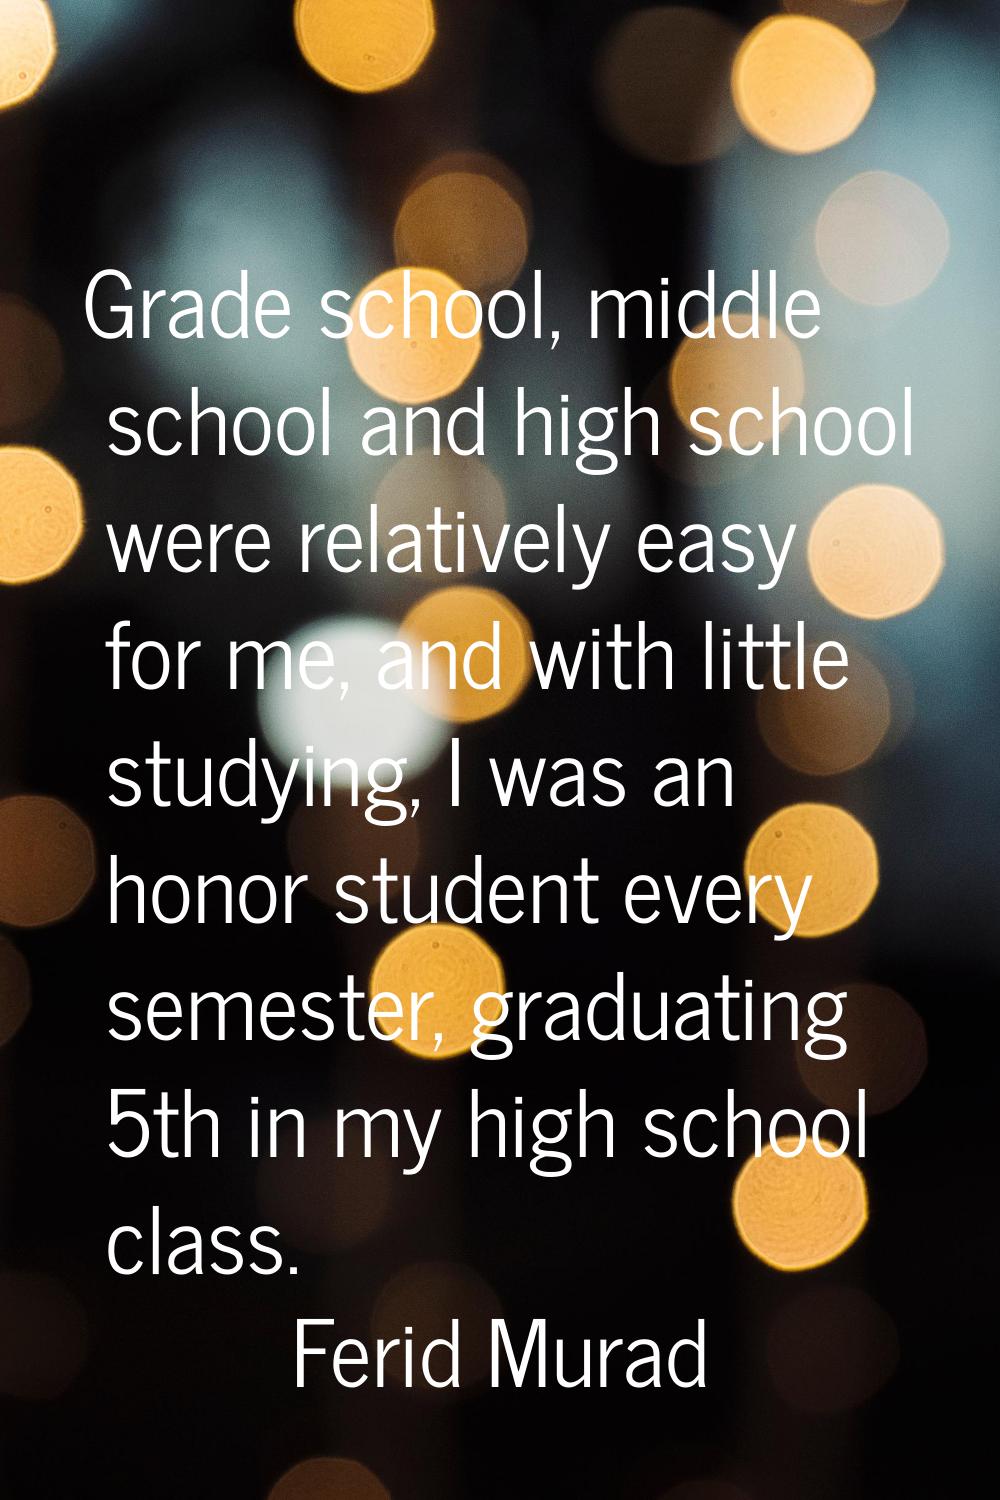 Grade school, middle school and high school were relatively easy for me, and with little studying, 